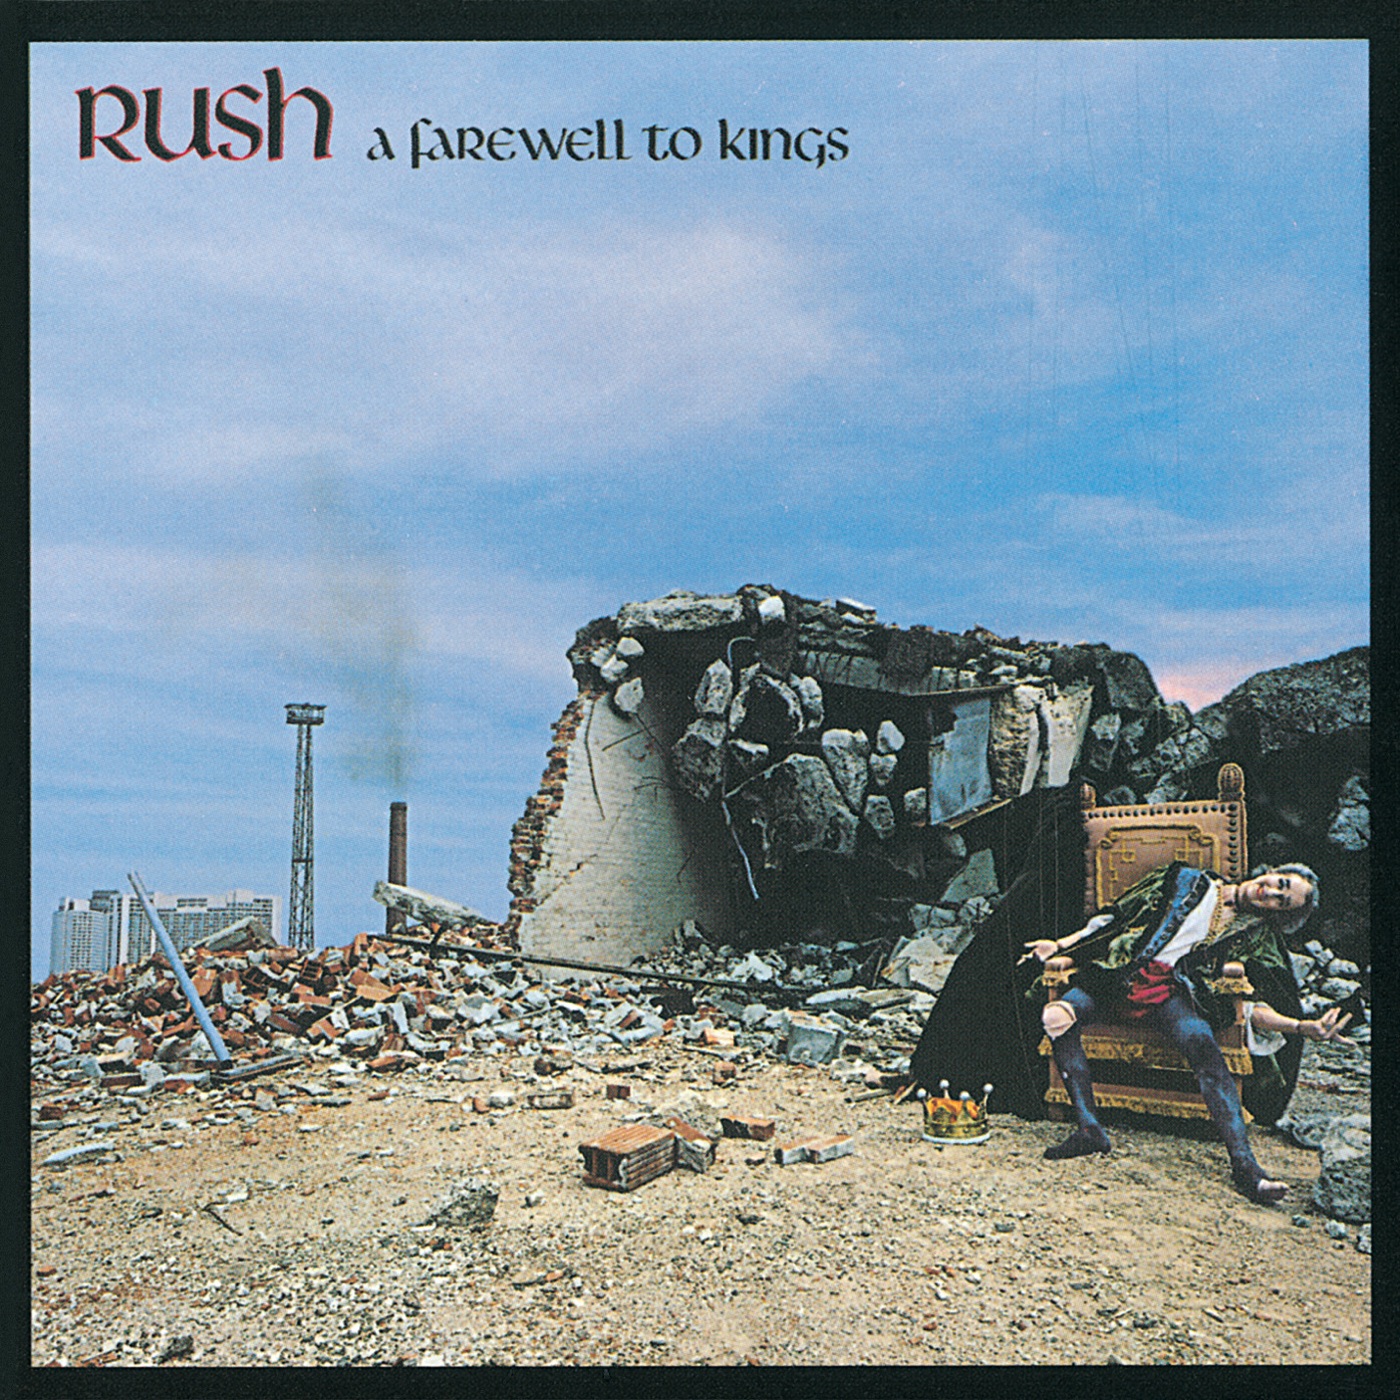 A Farewell To Kings by Rush